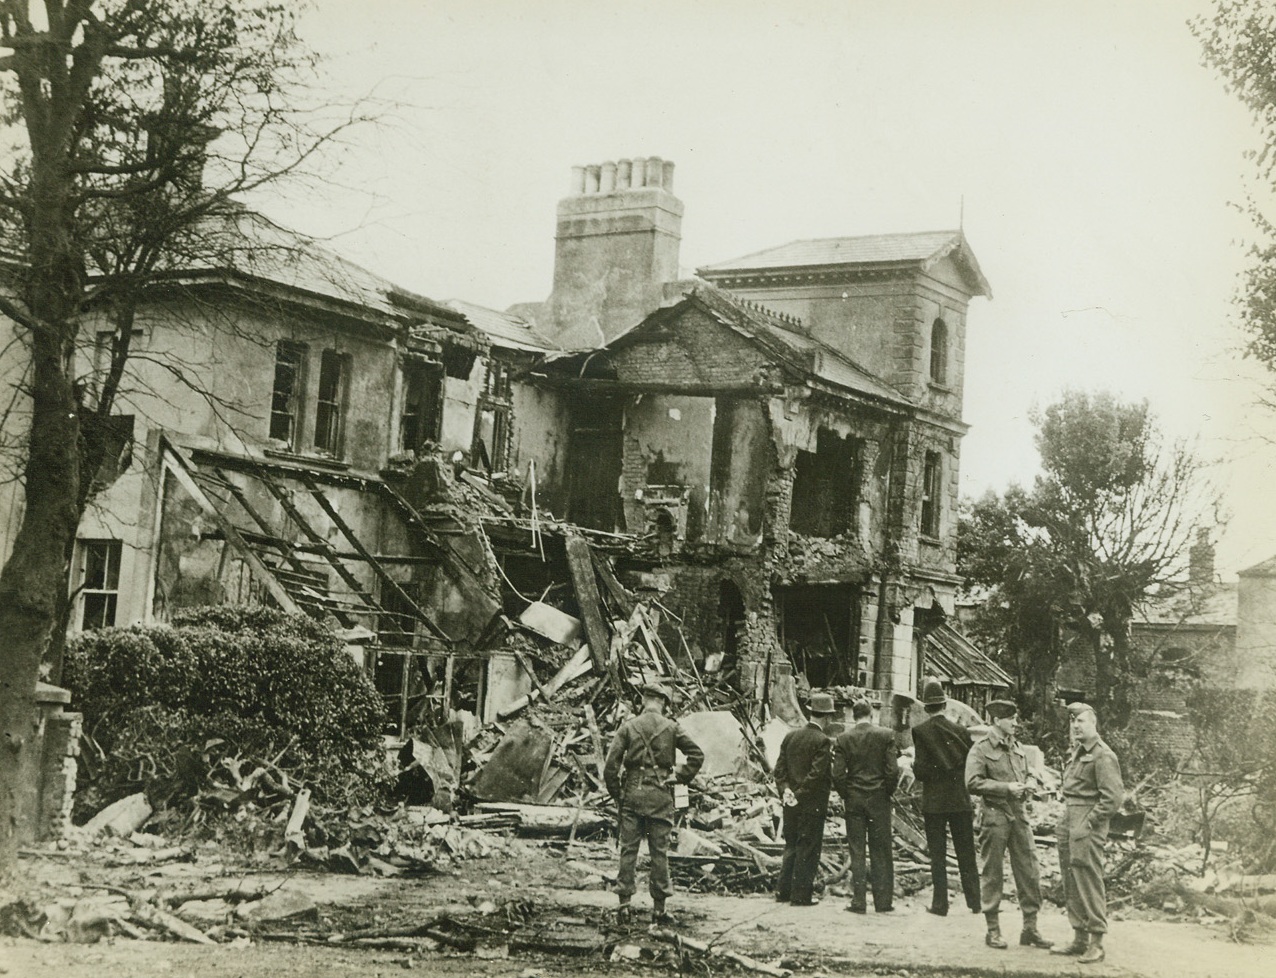 Nazi Funeral Pyre in Britain, 8/13/1943. England – One of two houses damaged when a German Heinkel III crashed after its motors had stopped suddenly, its bomb load exploding and setting the houses afire, at a South Coast town in England. Four people sleeping in the houses were treated for burns. Note hole in roof of second house, (right background in photo). (Passed by censors) Credit: ACME;